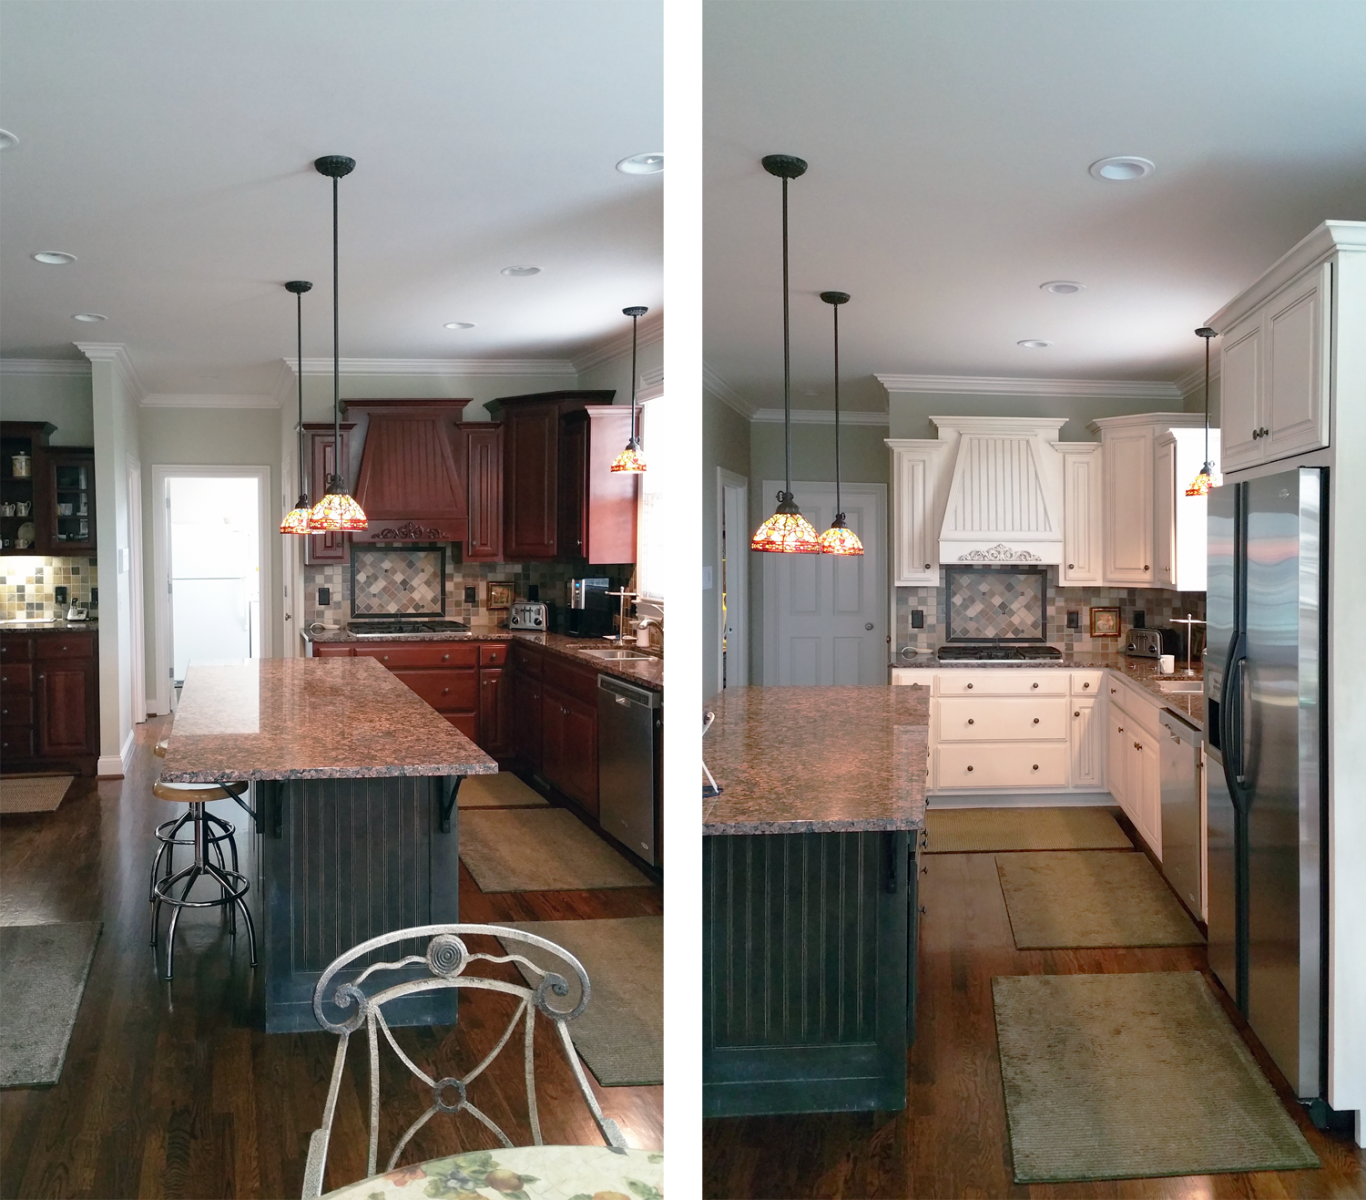 View this Before and After Brentwood customer’s kitchen cabinet transformation adding a warm modern Tuscan glaze look.